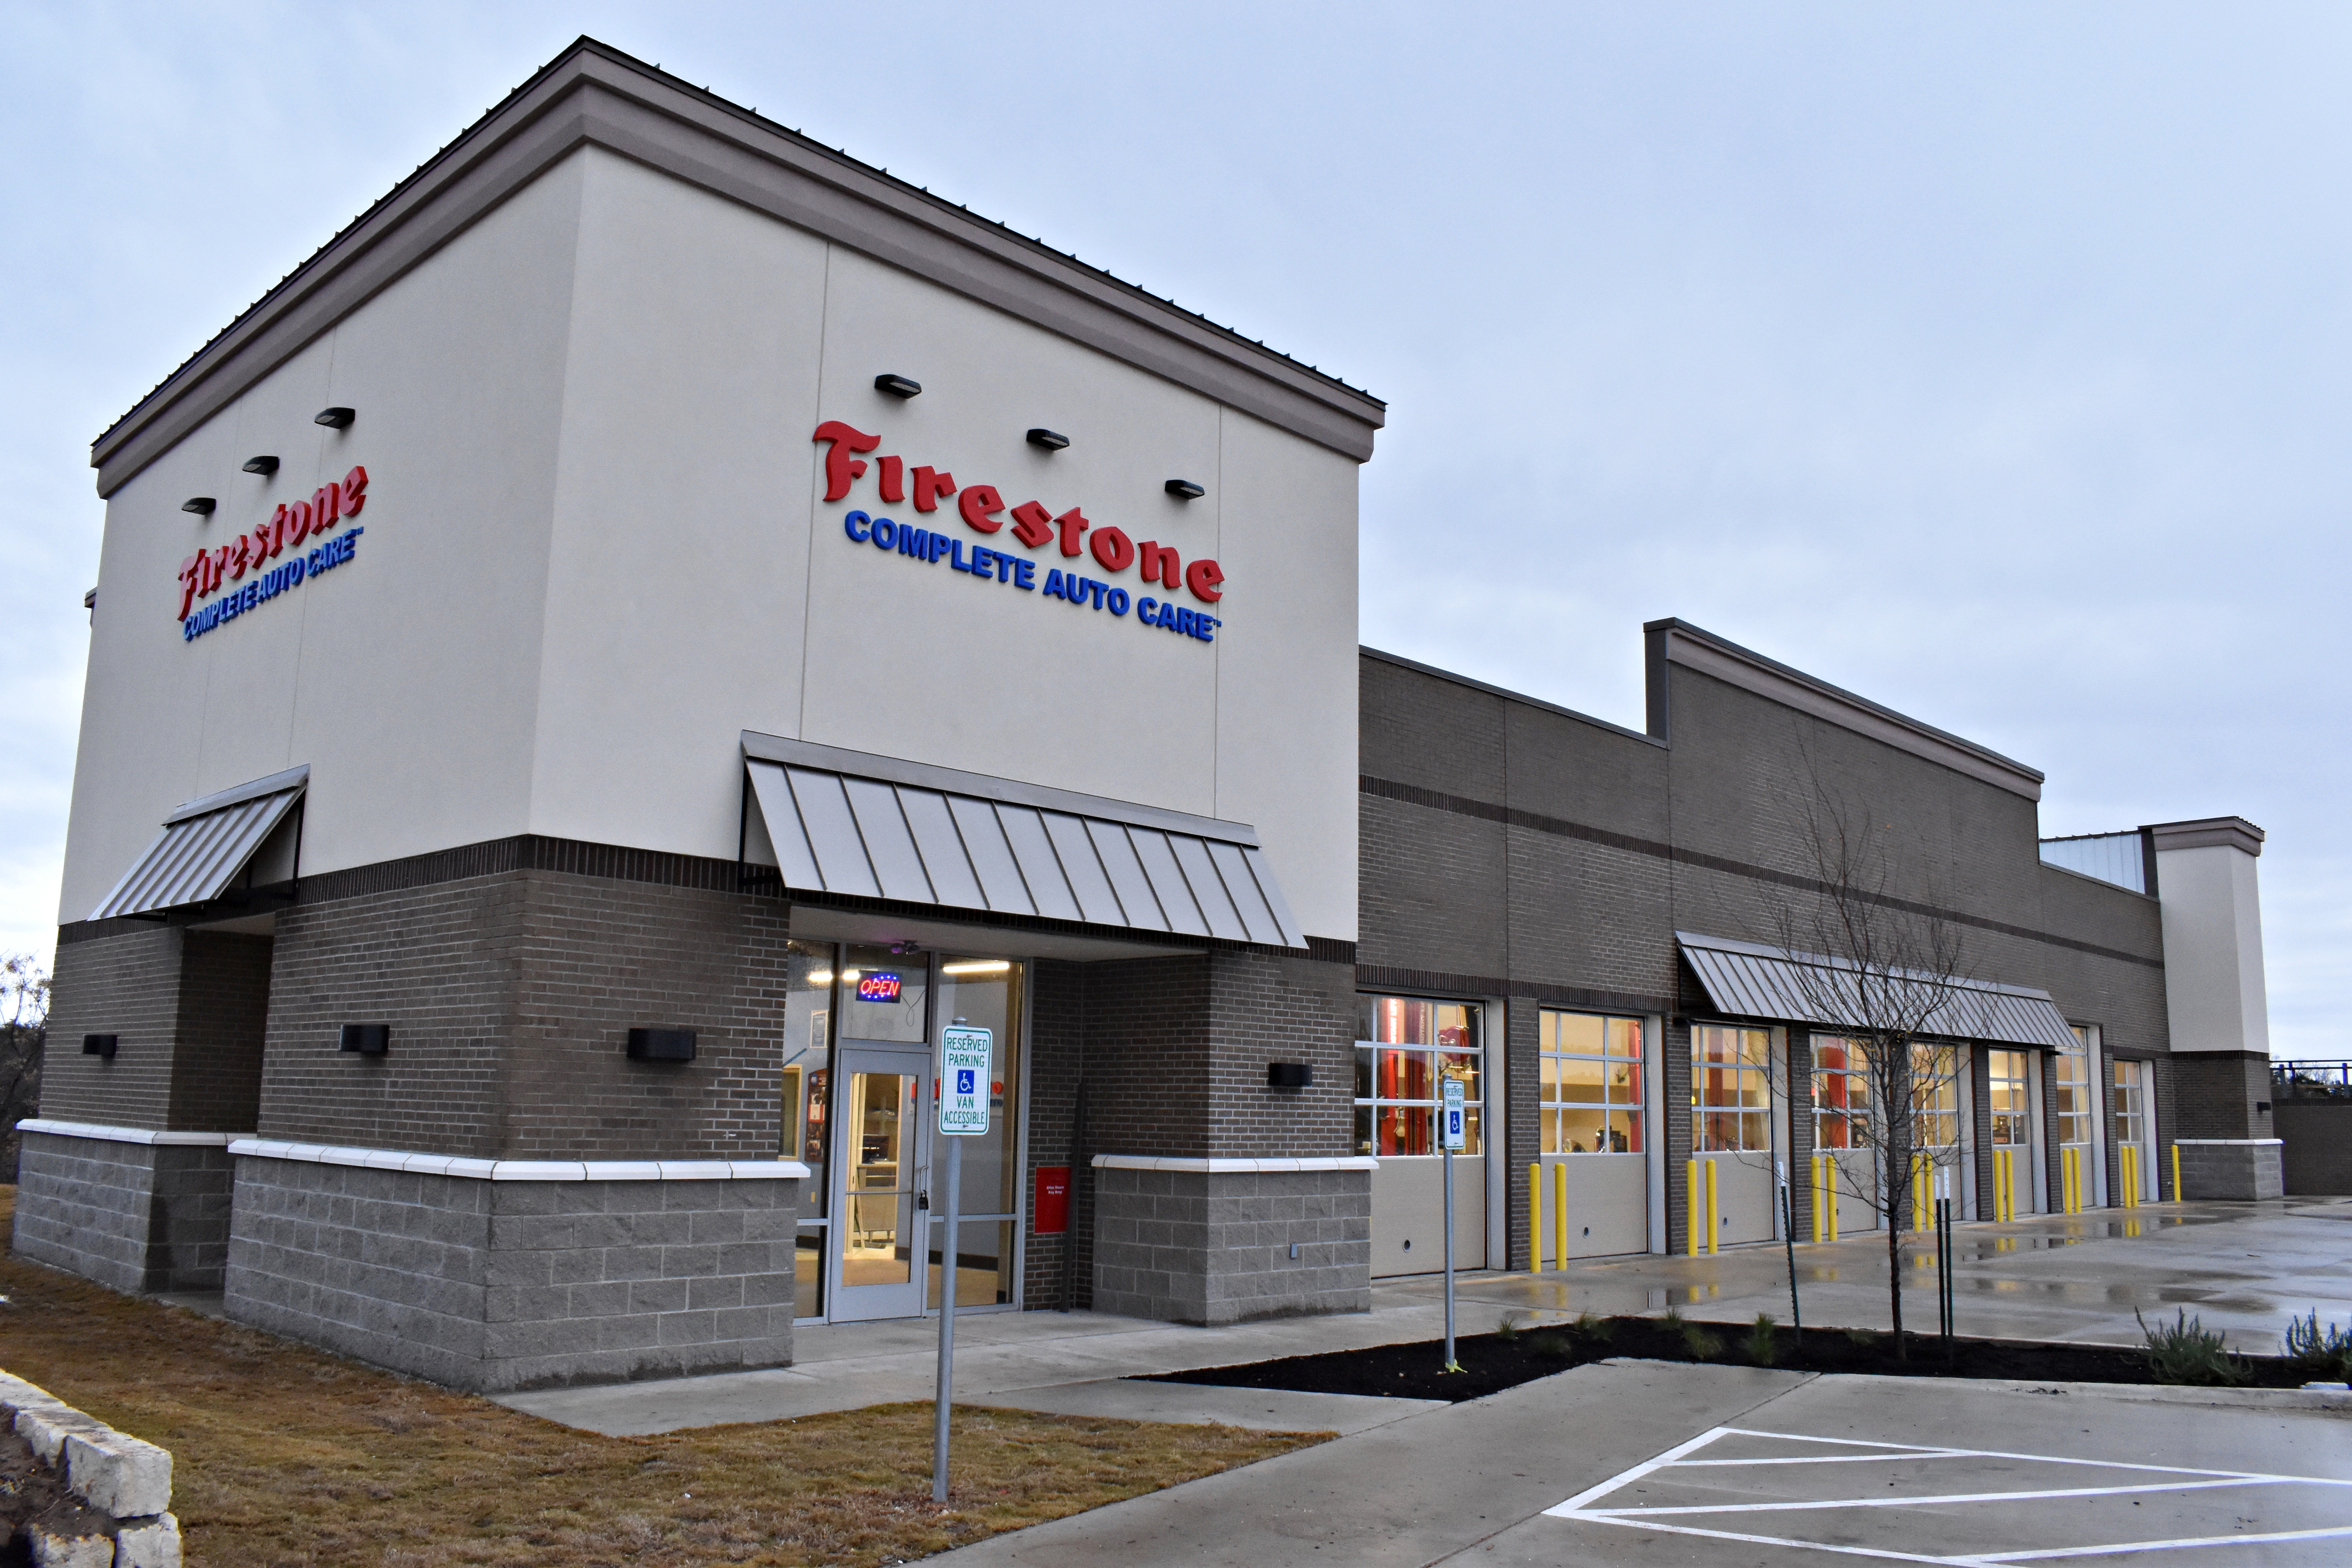 Ground-up Firestone retail automotive store by Westwood Contractors.